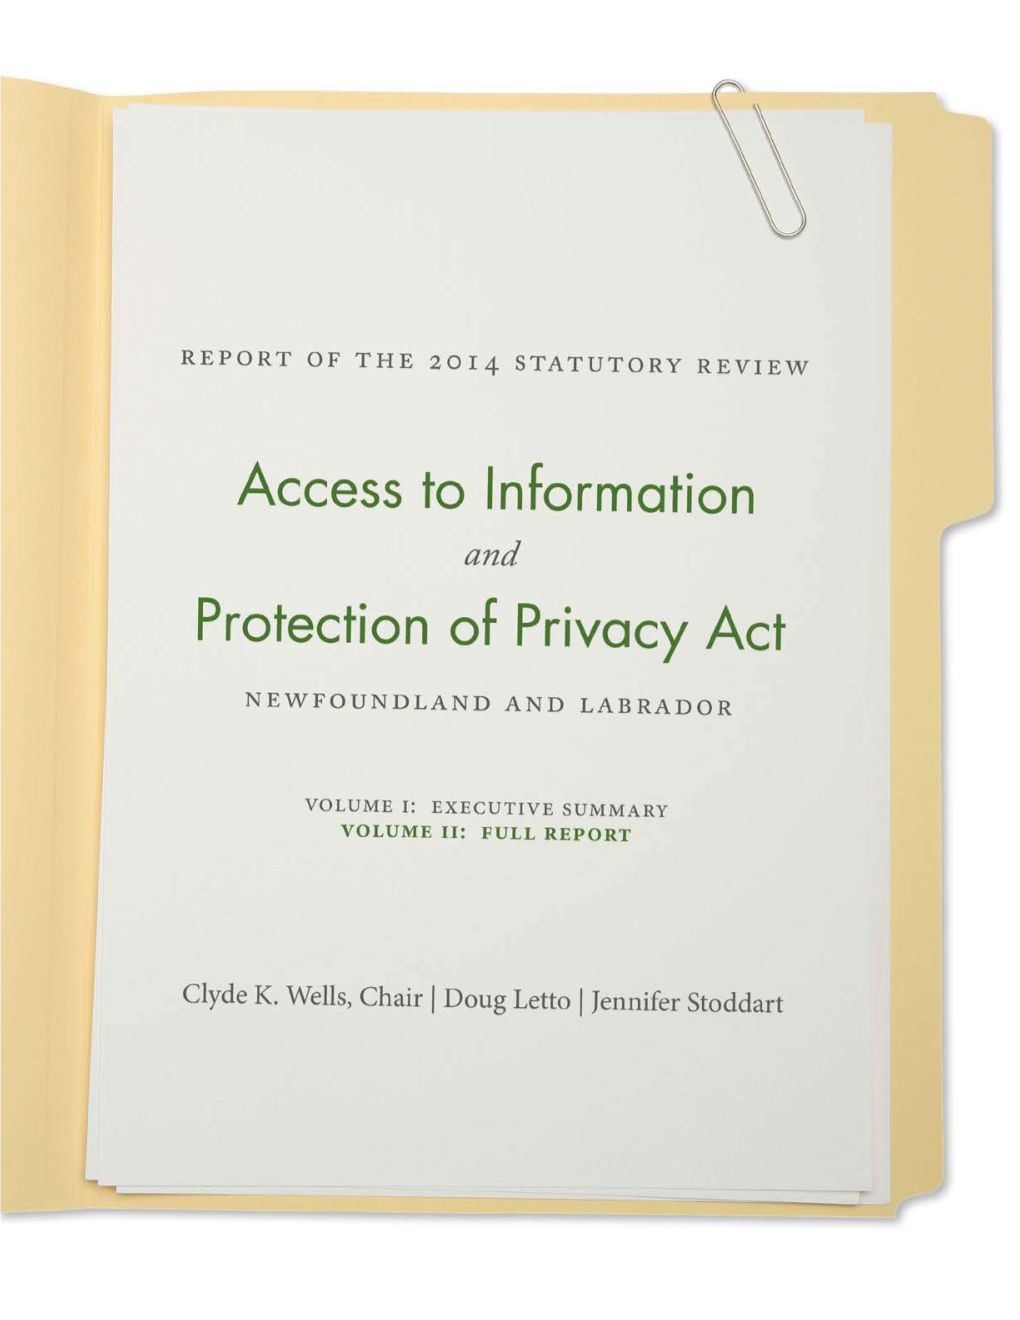 Access to Information and Protection of Privacy Act